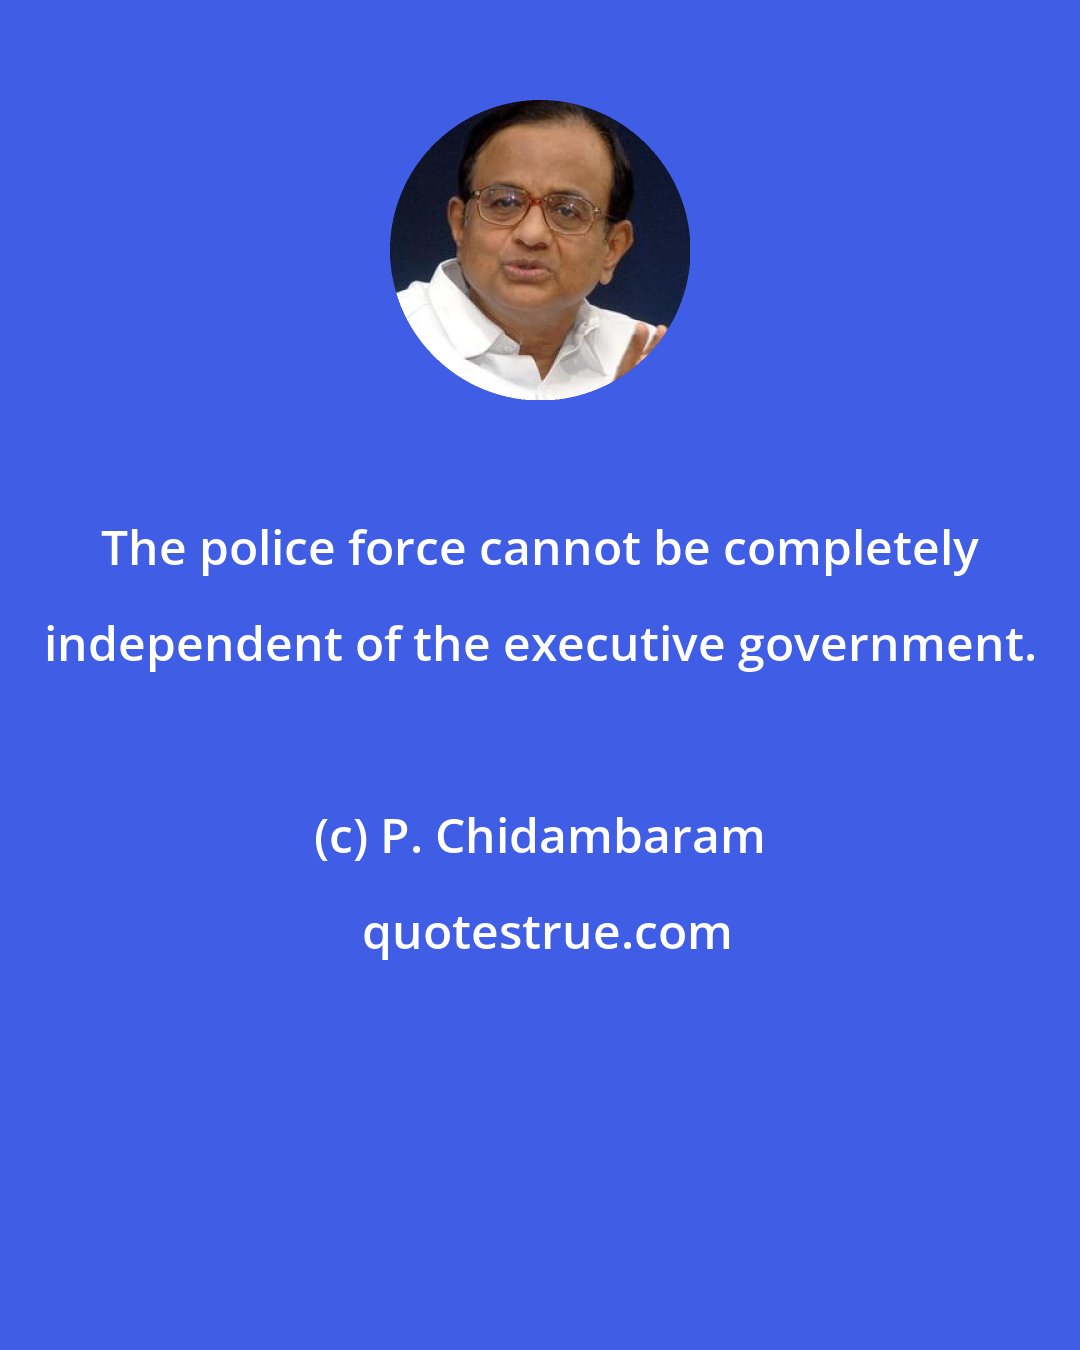 P. Chidambaram: The police force cannot be completely independent of the executive government.